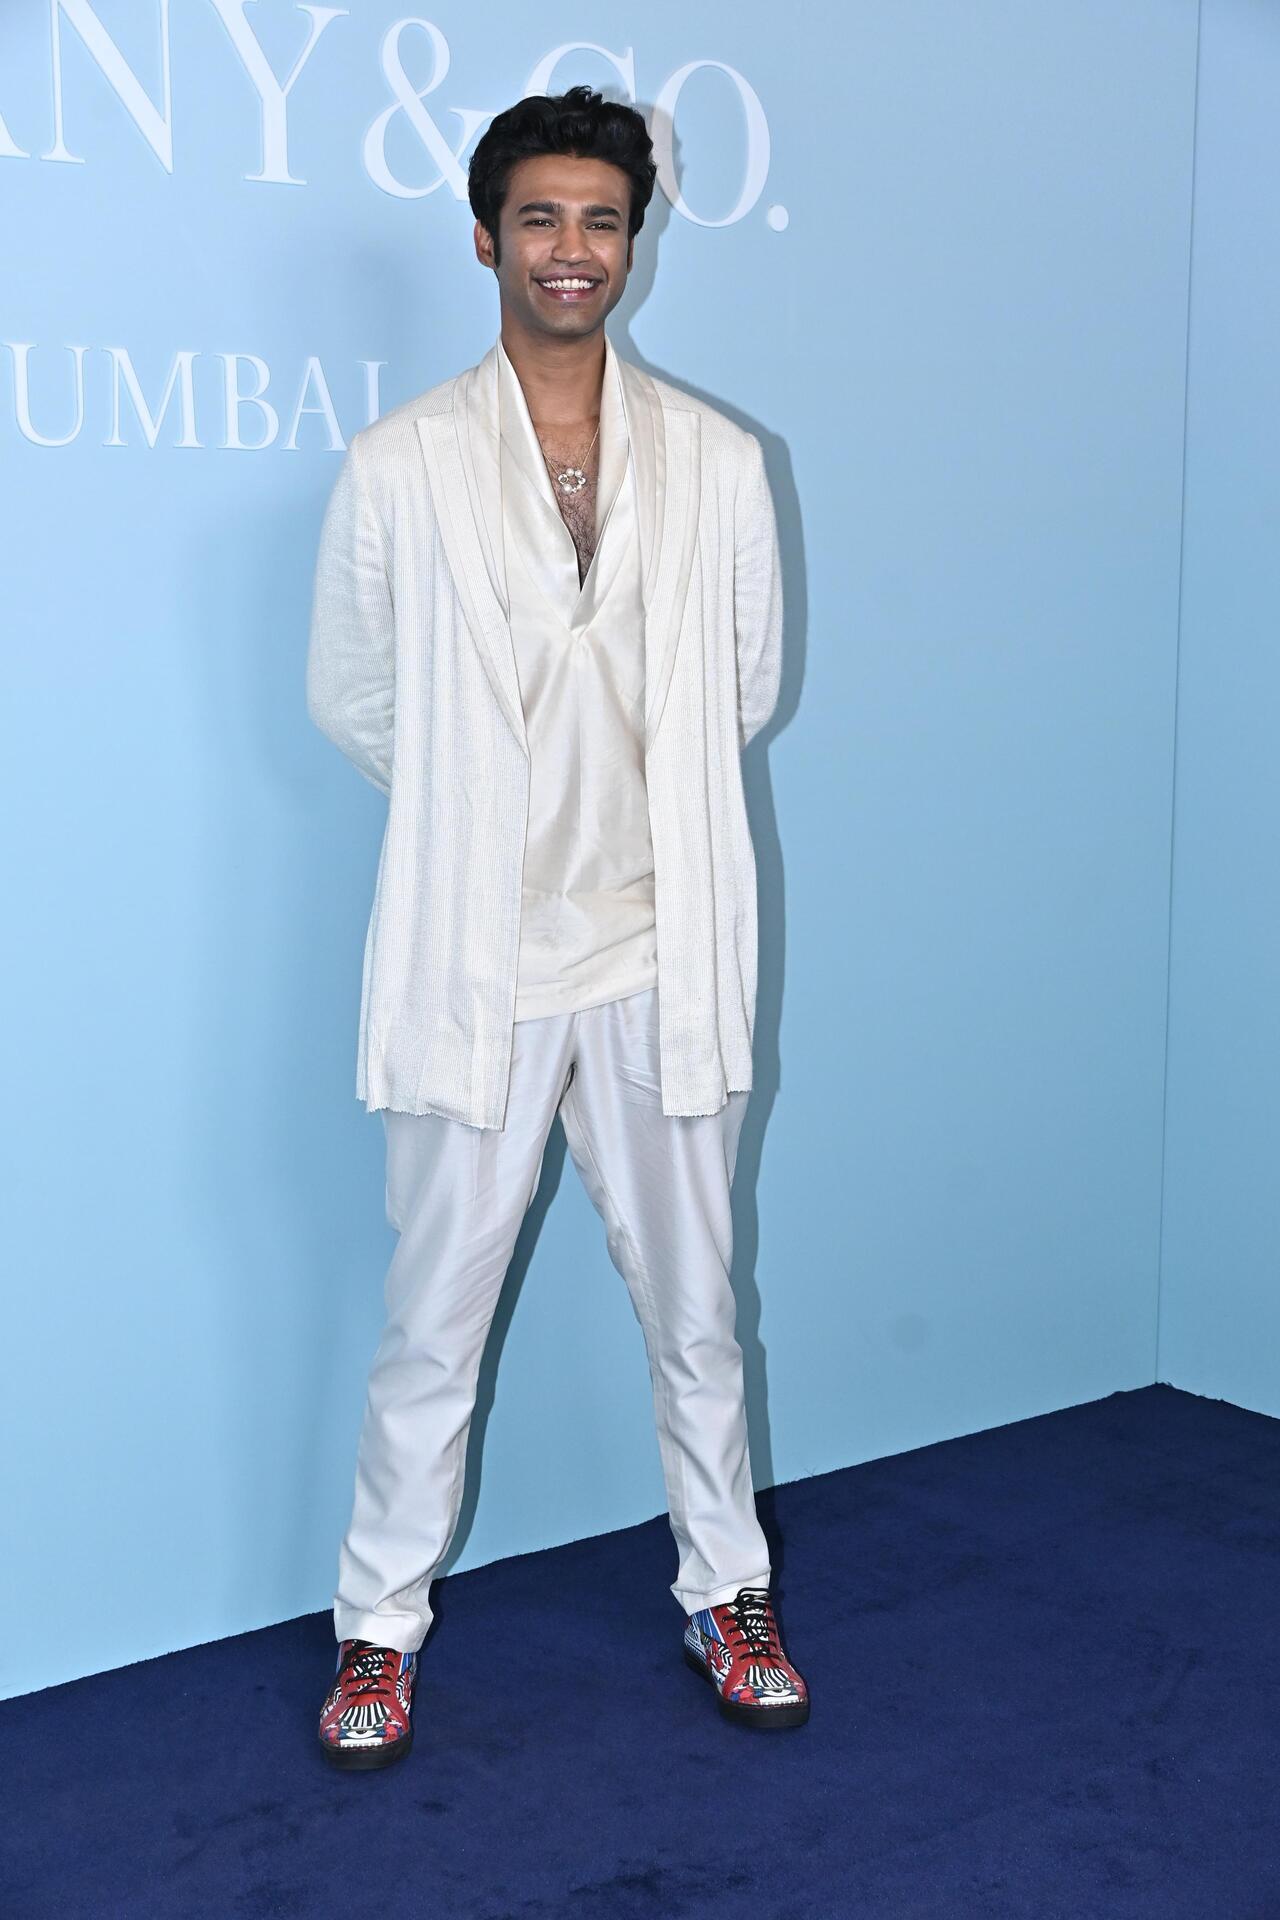 Irrfan Khan's son Babil Khan was all smiles as he posed for the paparazzi at the event in an all-white outfit